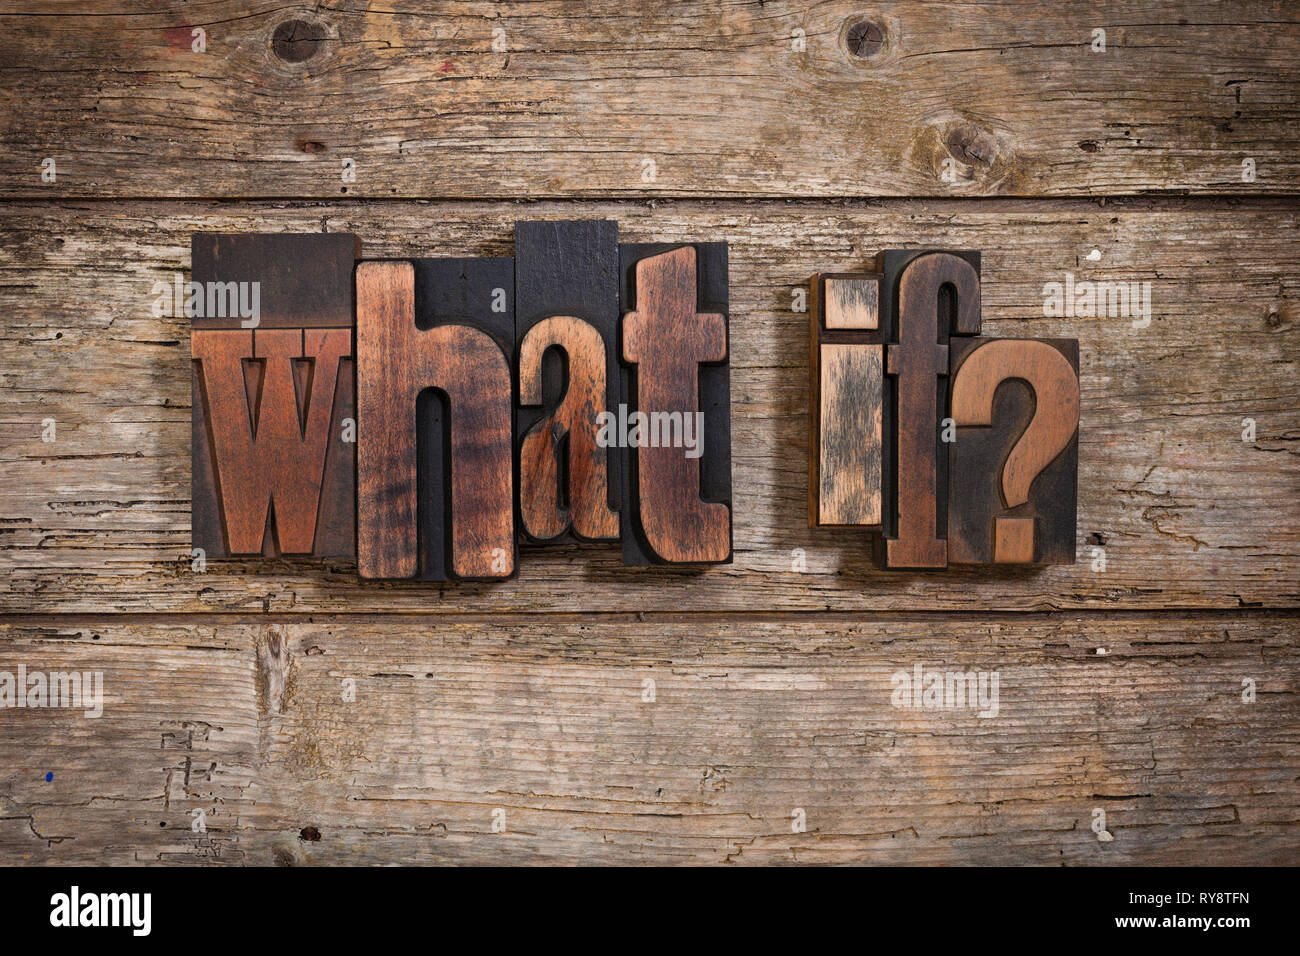 what if, phrase set with vintage letterpress printing blocks on rustic wooden background Stock Photo